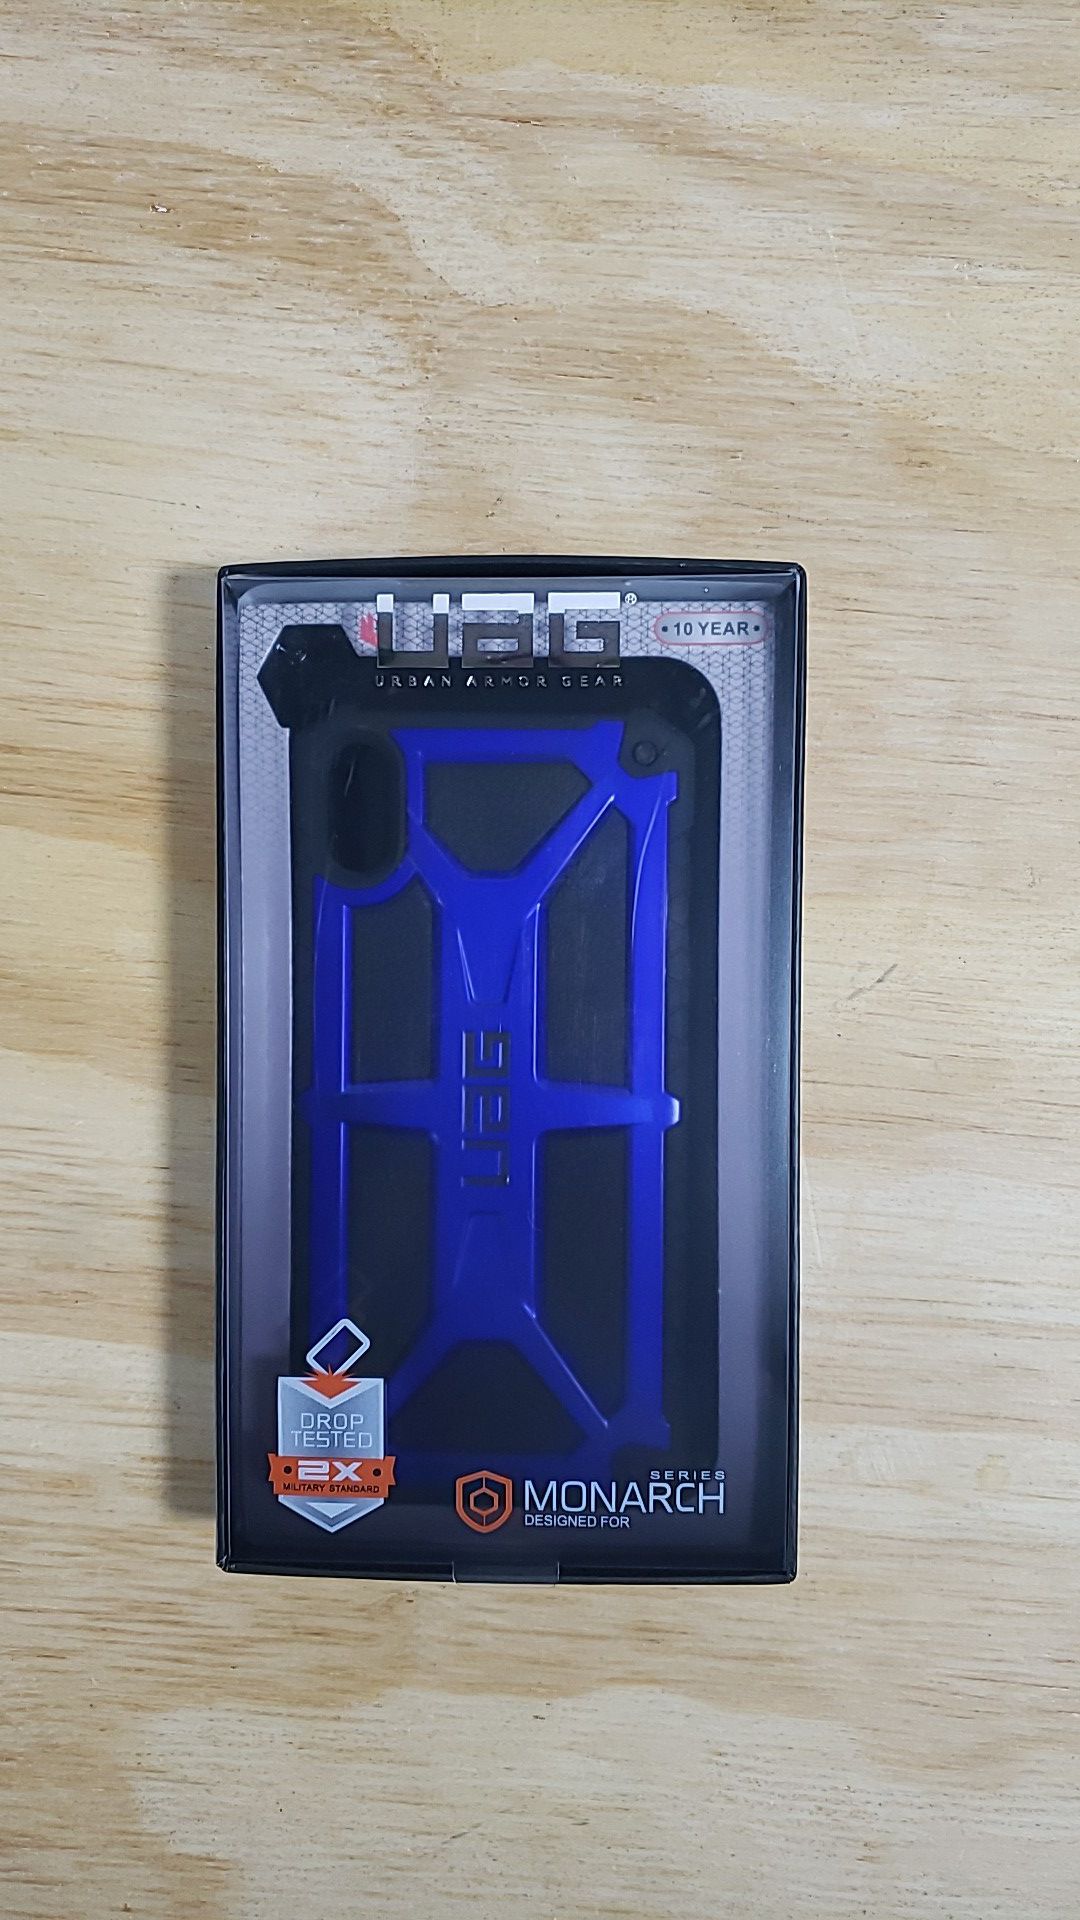 UAG Case For iPhone X/Xs Color Blue And Black